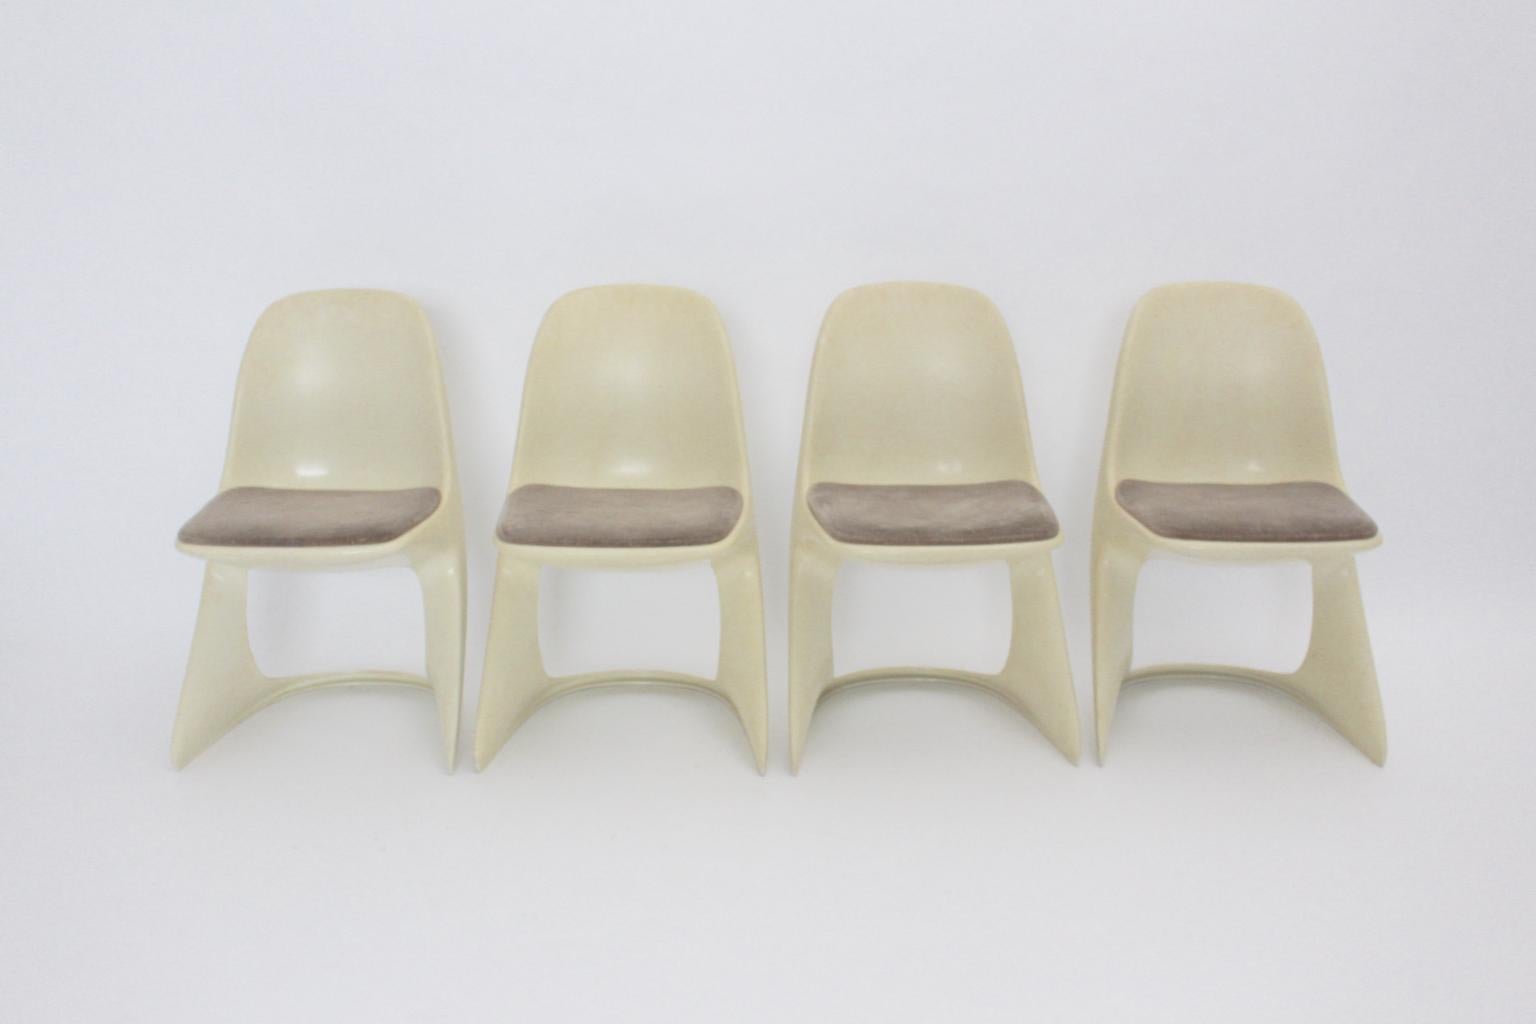 Space Age set of four vintage dining chairs named Casalino by Alexander Begge, Germany, 1971 for Casala, Germany was made of  cream white plastic. Also the dining chairs feature upholstered seats covered with brown velvet fabric.
The vintage